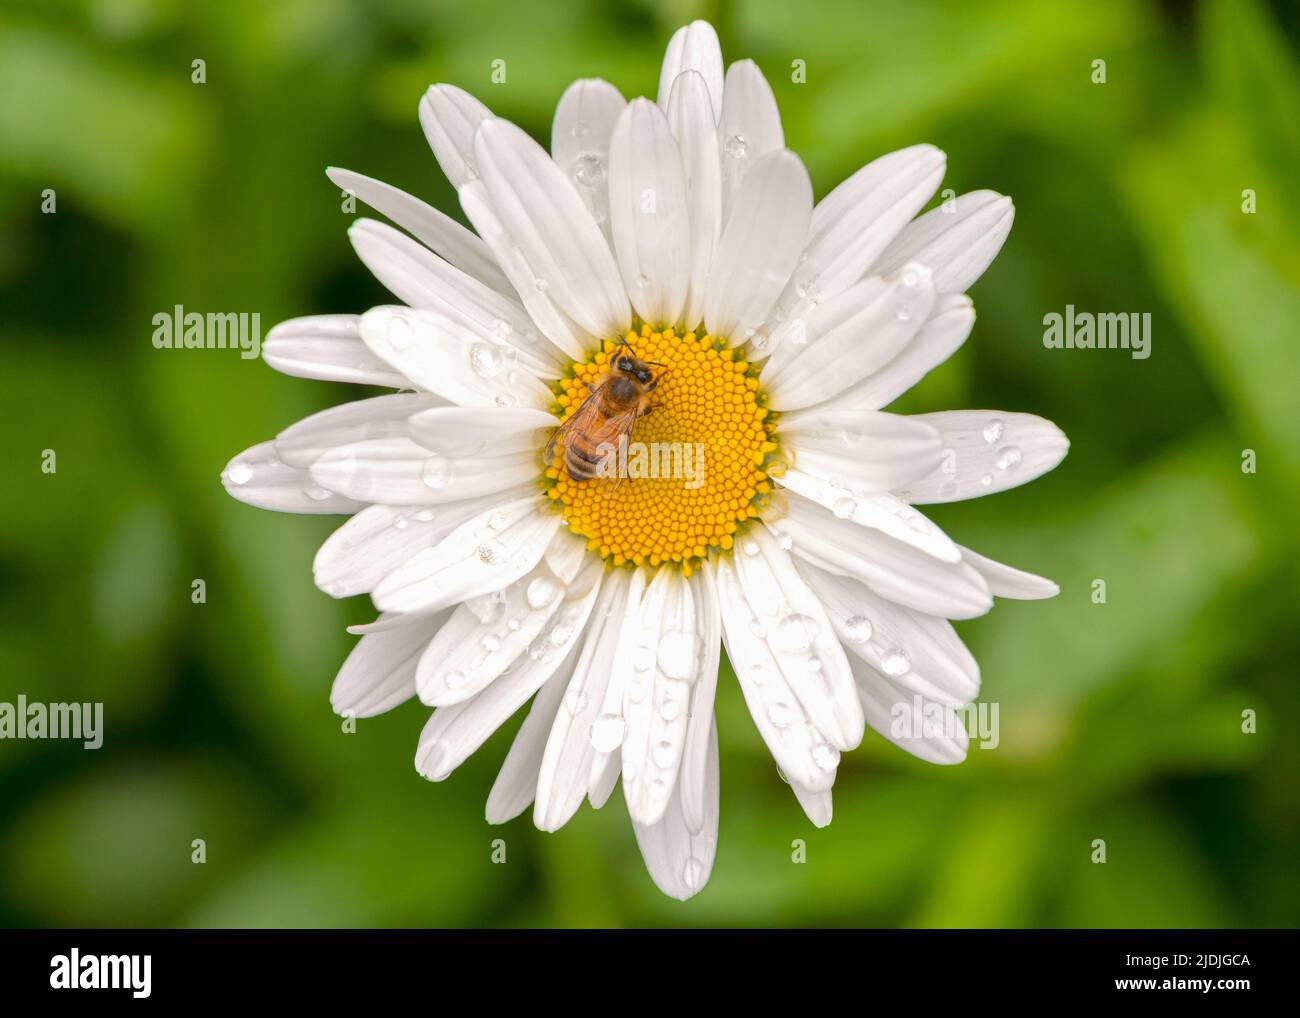 Close up (macro) of a honey bee in the center of a wet daisy flower Stock Photo